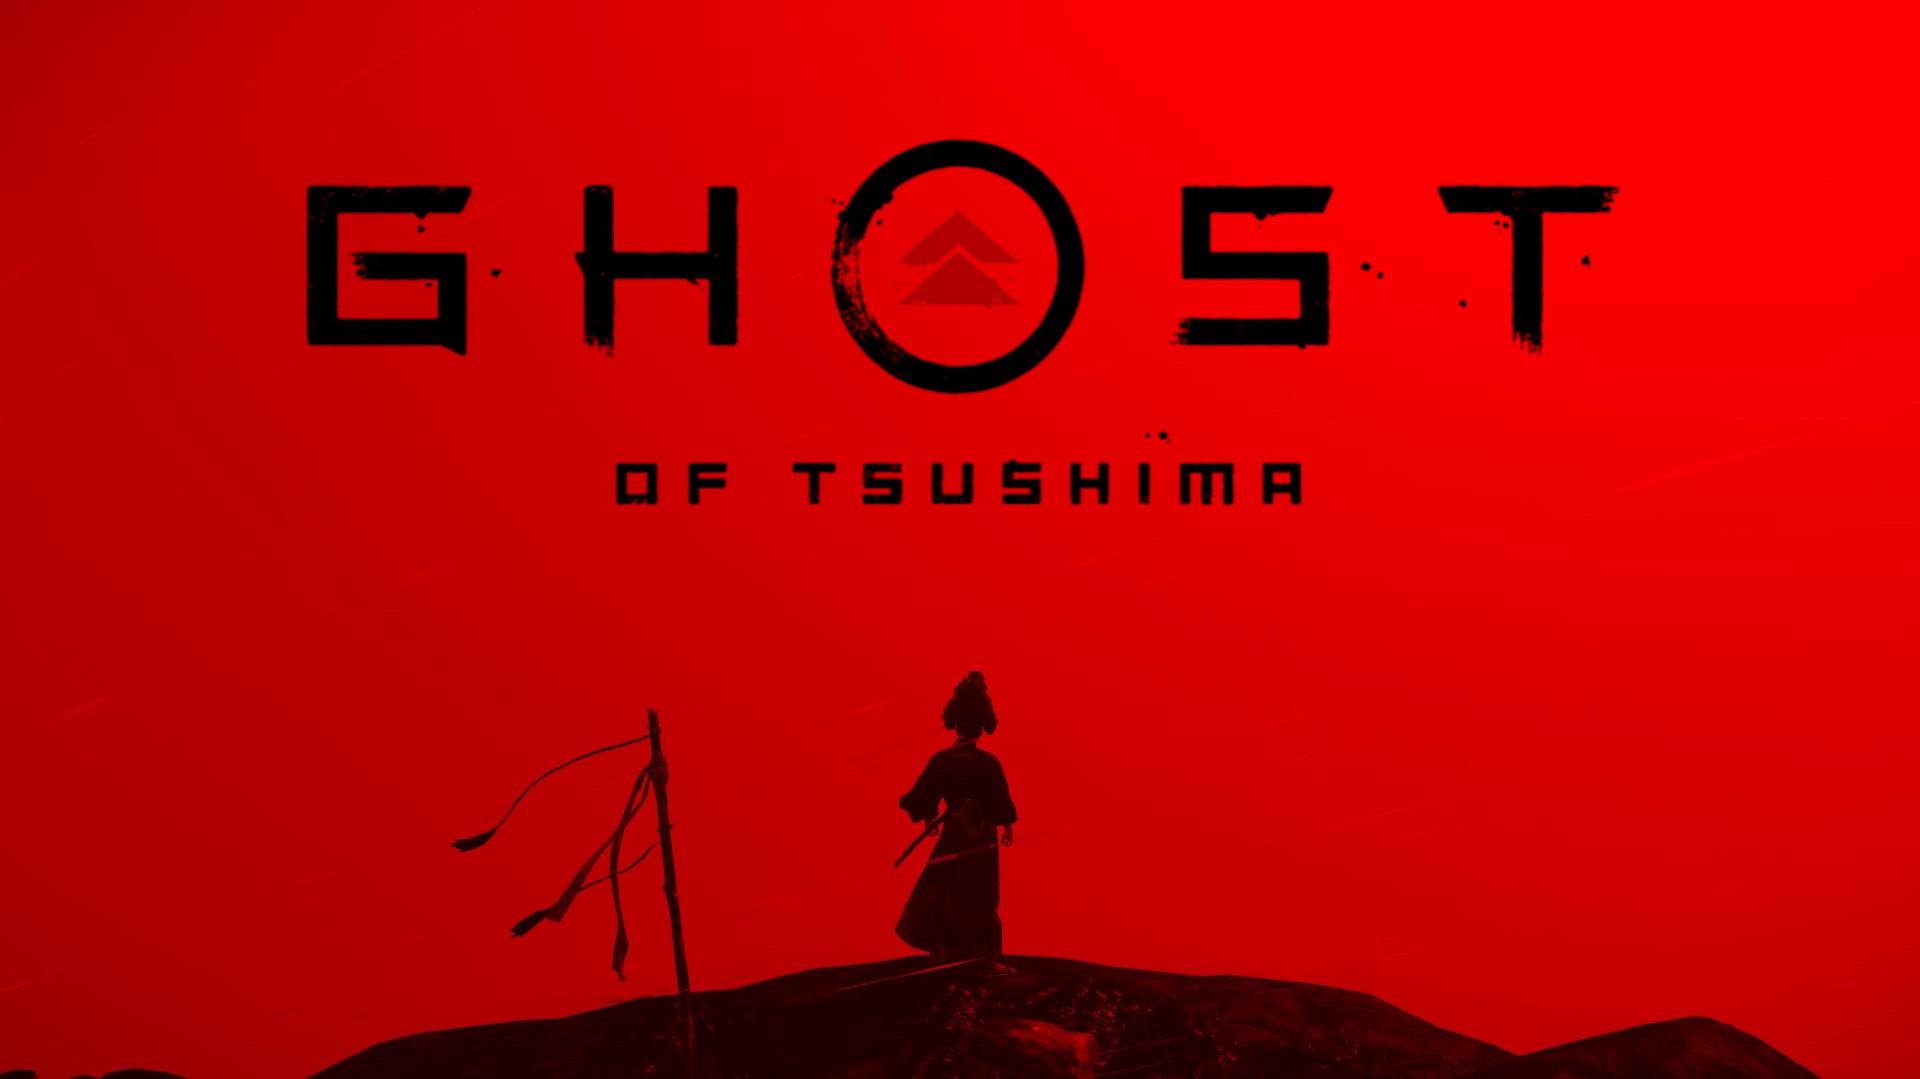 image][PS4] This Ghost of Tsushima desktop wallpaper I made using the in game photo mode